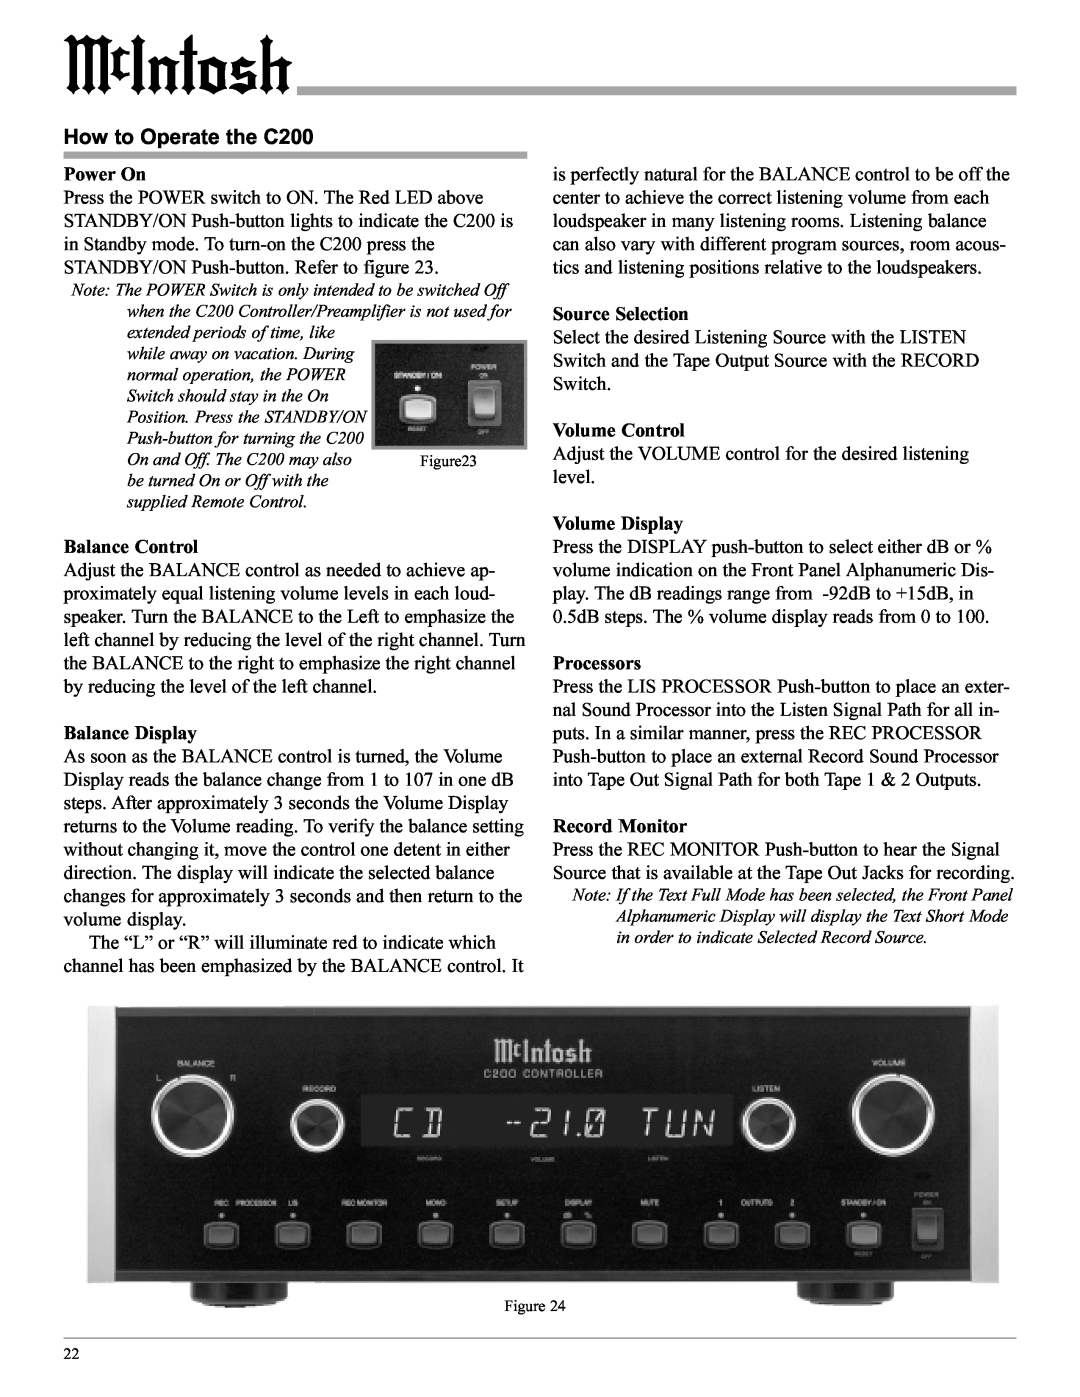 McIntosh manual How to Operate the C200, Power On, Balance Control, Balance Display, Source Selection, Volume Control 